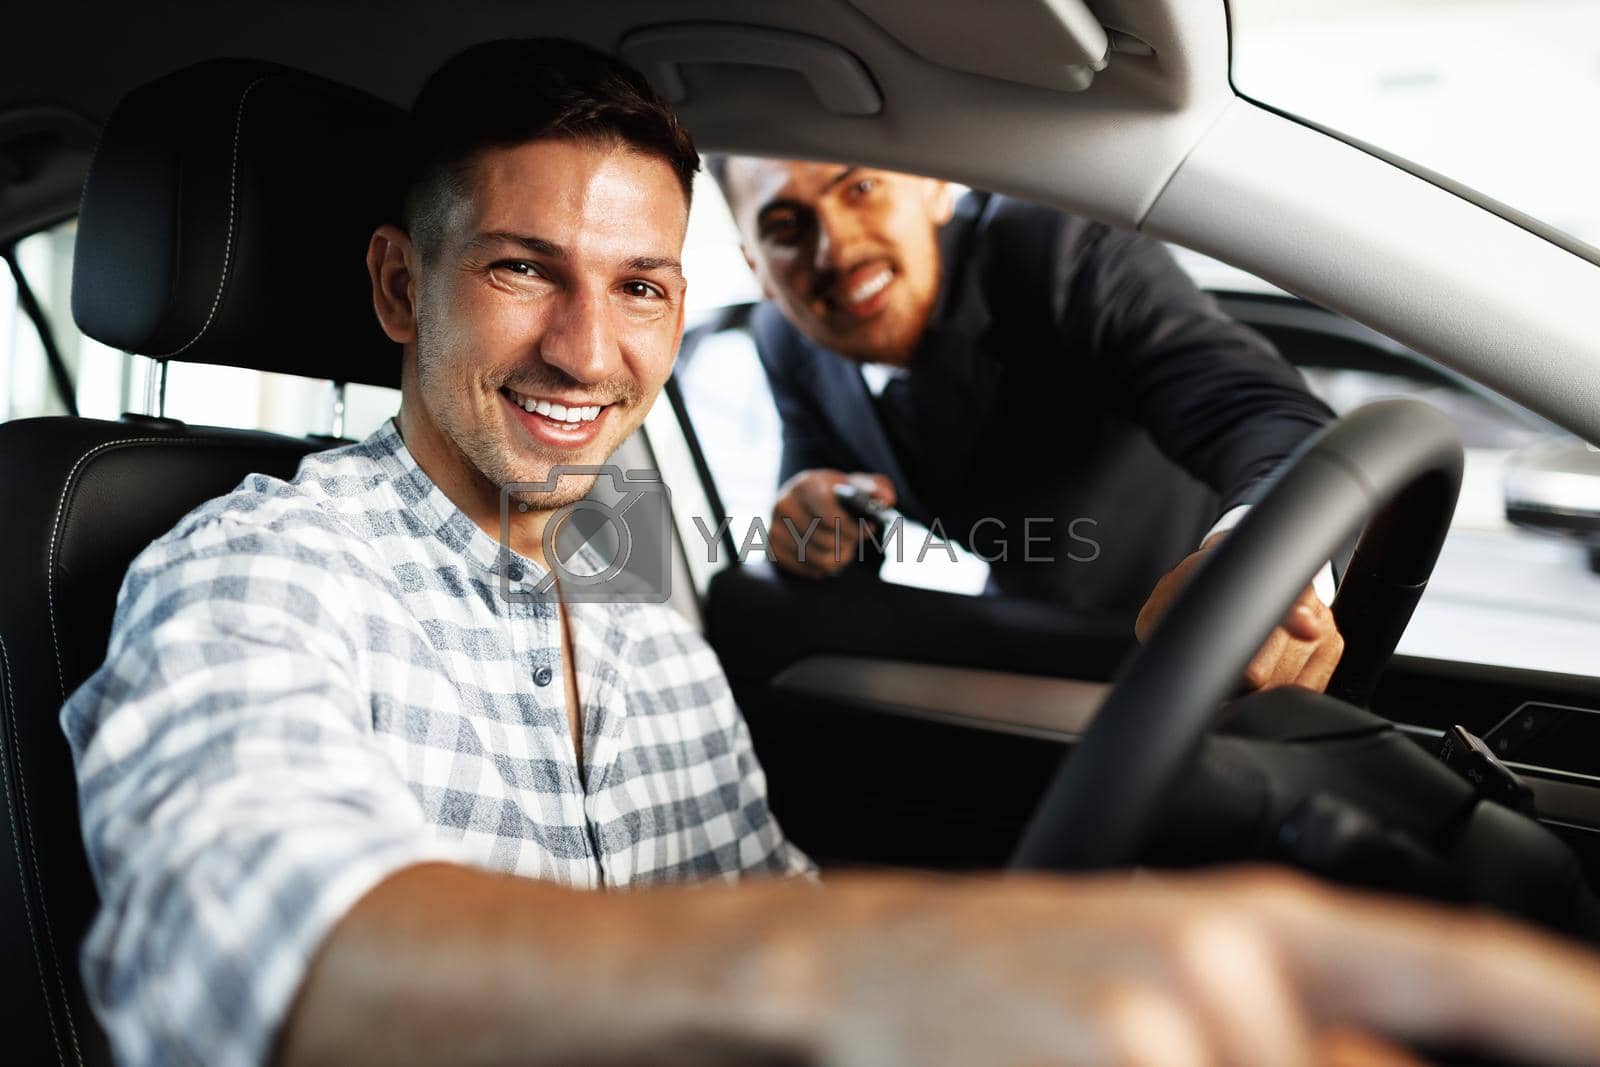 Royalty free image of Cheerful young man customer buys a new car in a dealership by Fabrikasimf